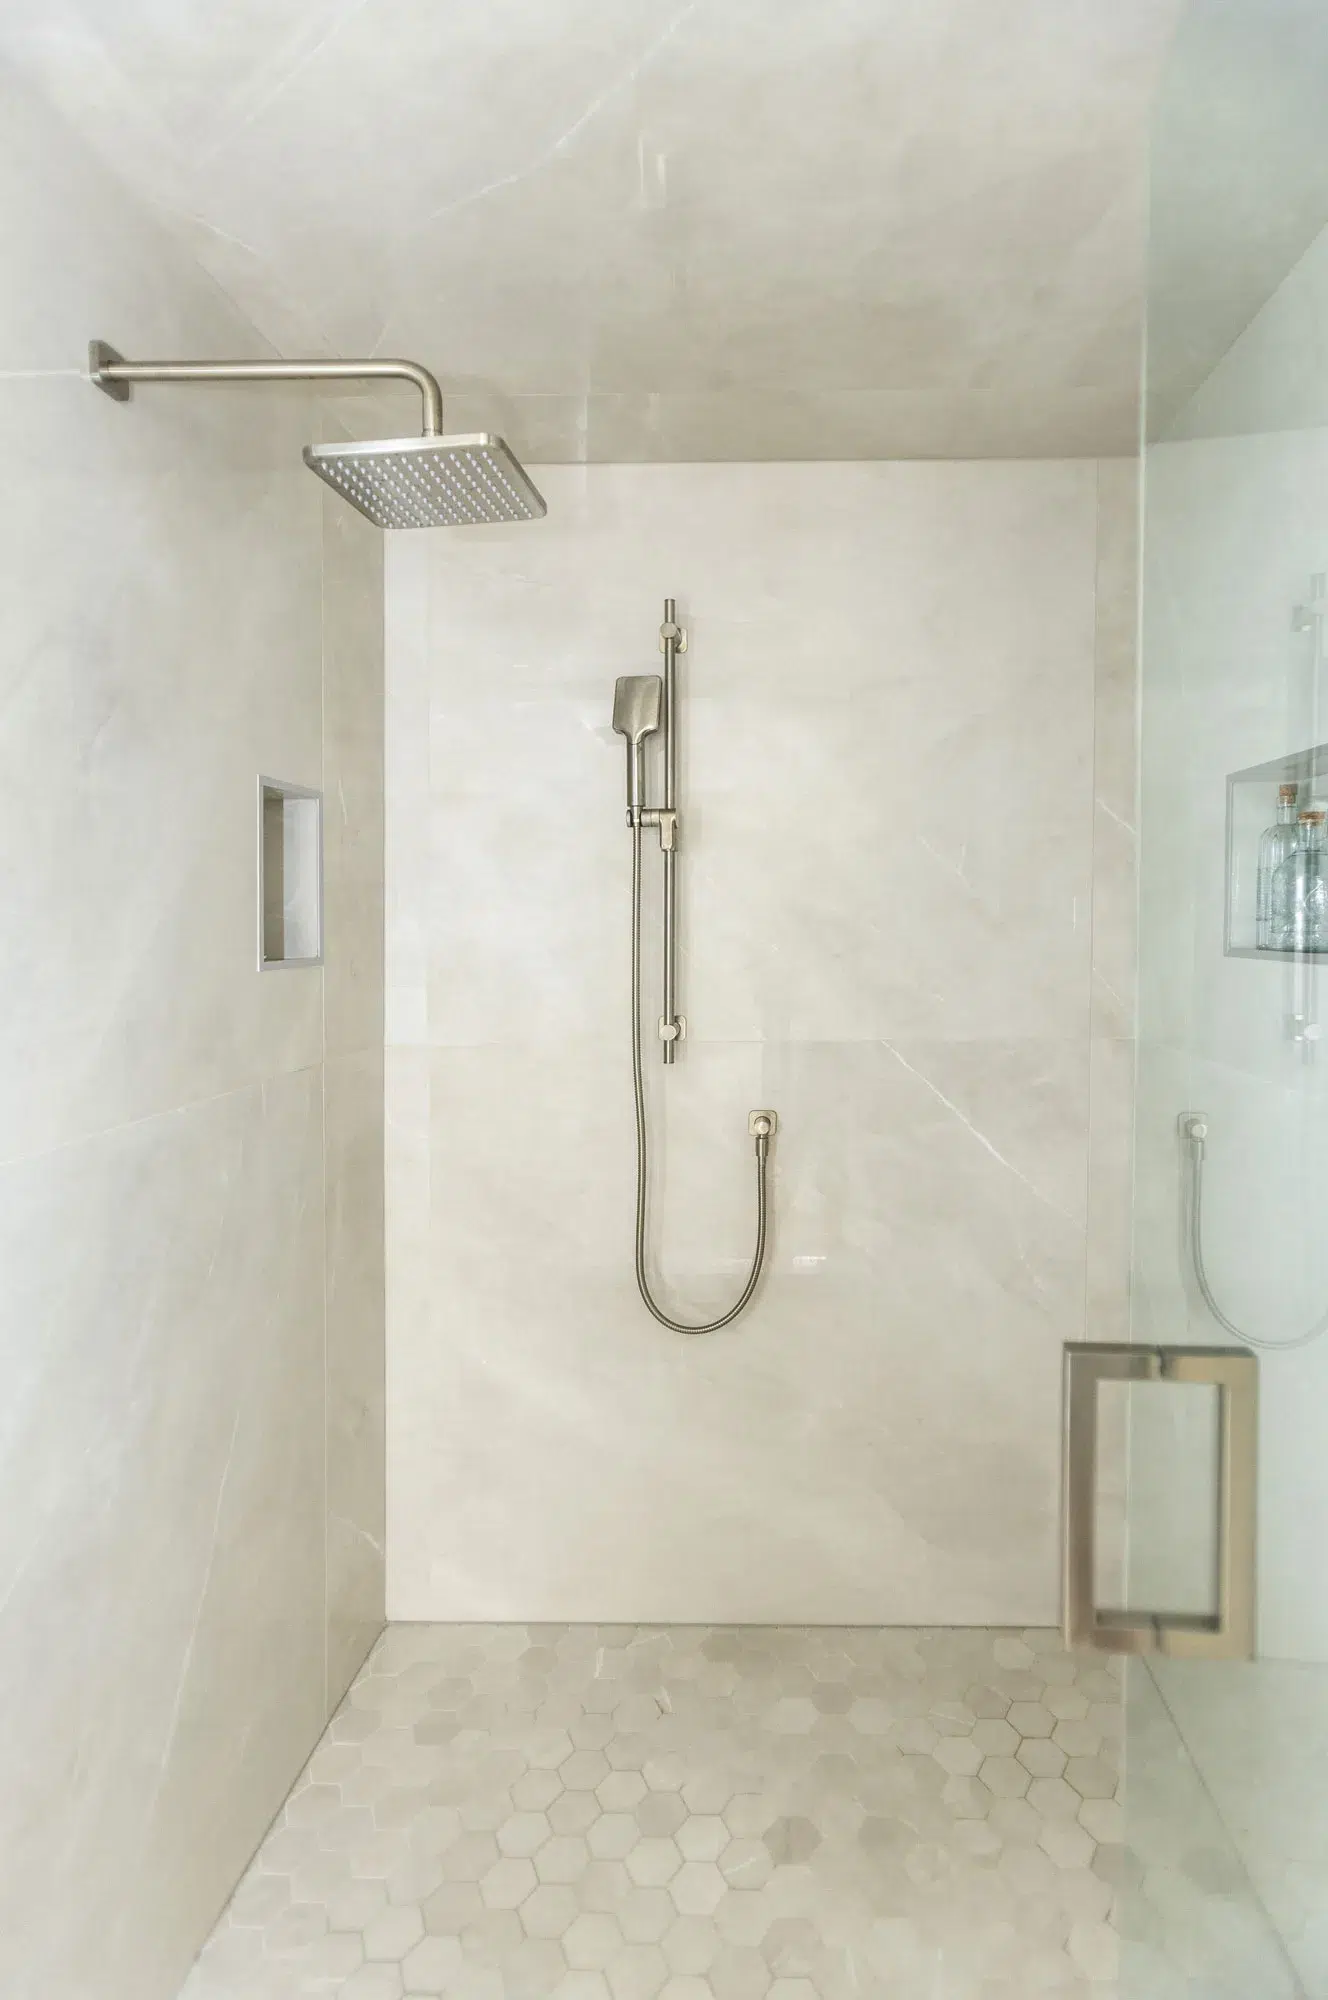 Inside a beautiful tiled shower with glass door with nickel rain shower head and hand held shower